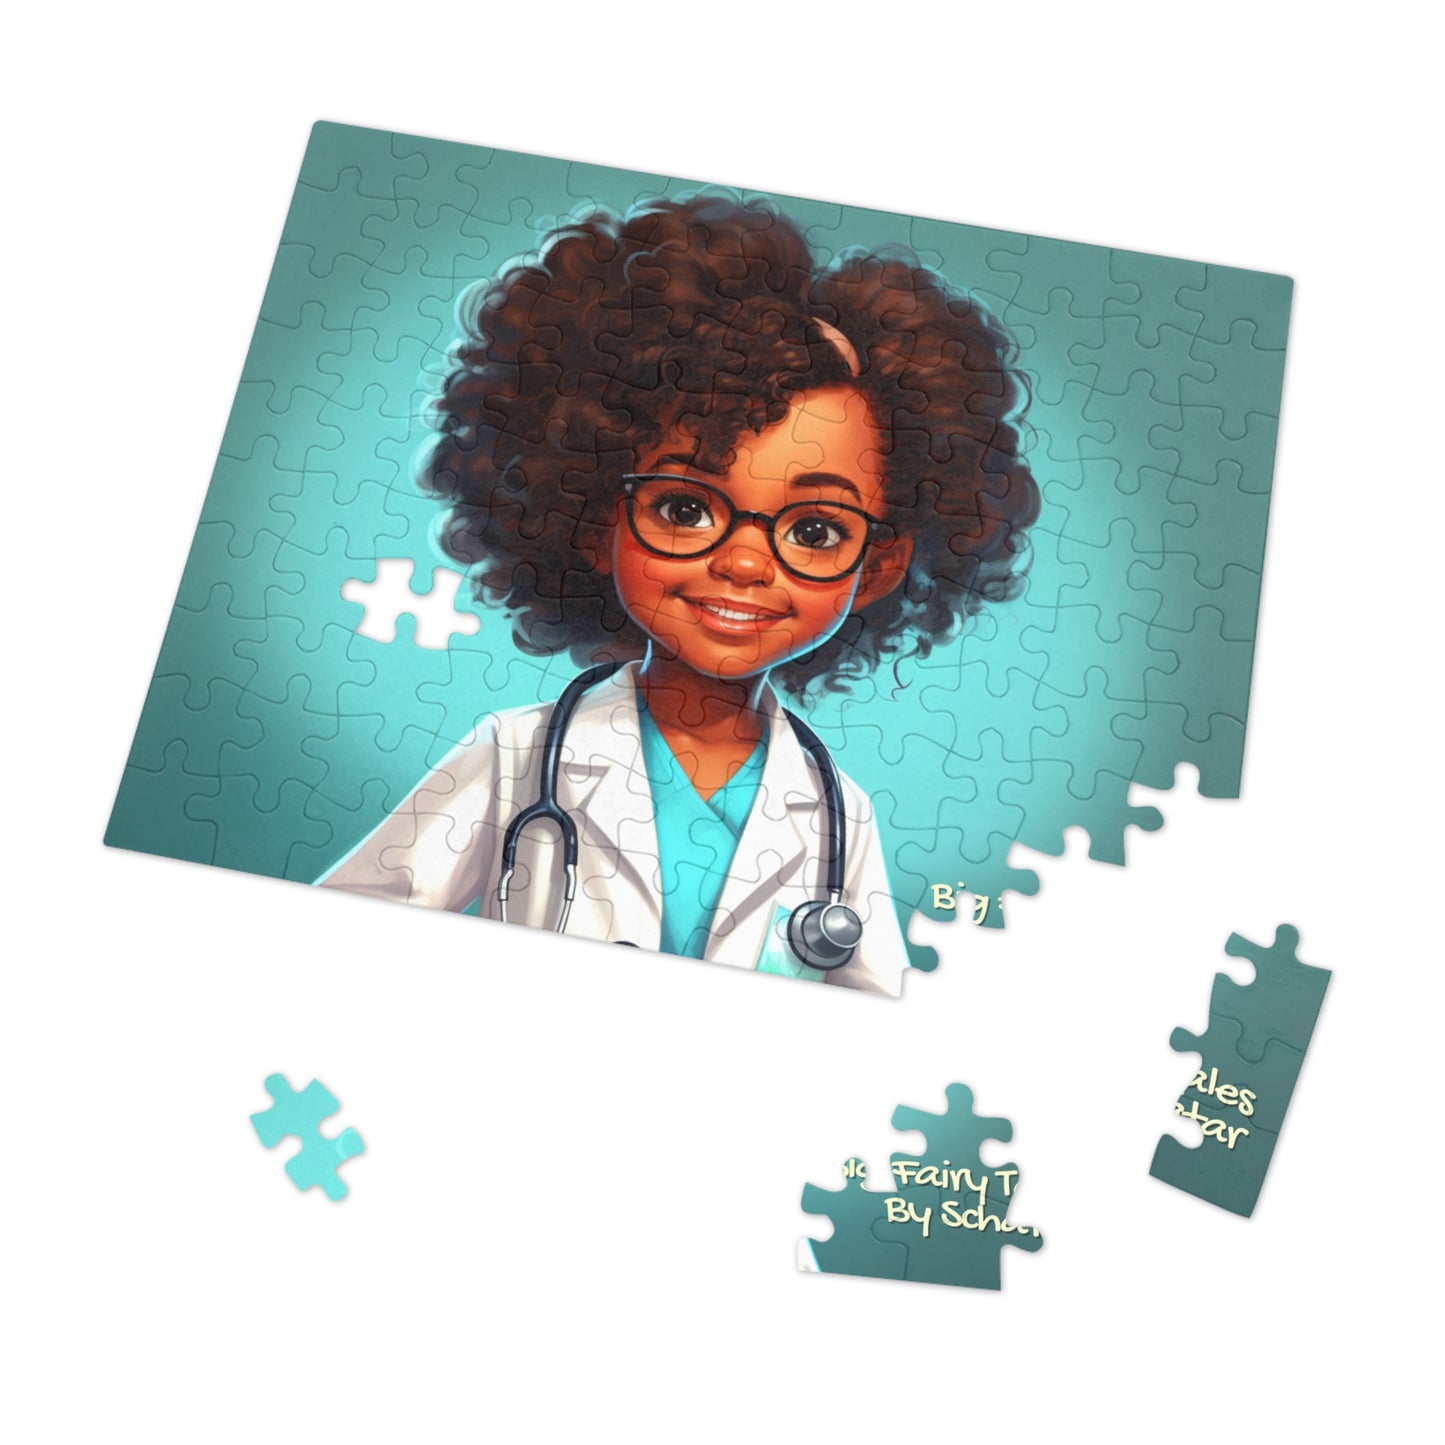 The Doctor - Big Little Professionals Puzzle 7 From Big Fairy Tales By Schatar